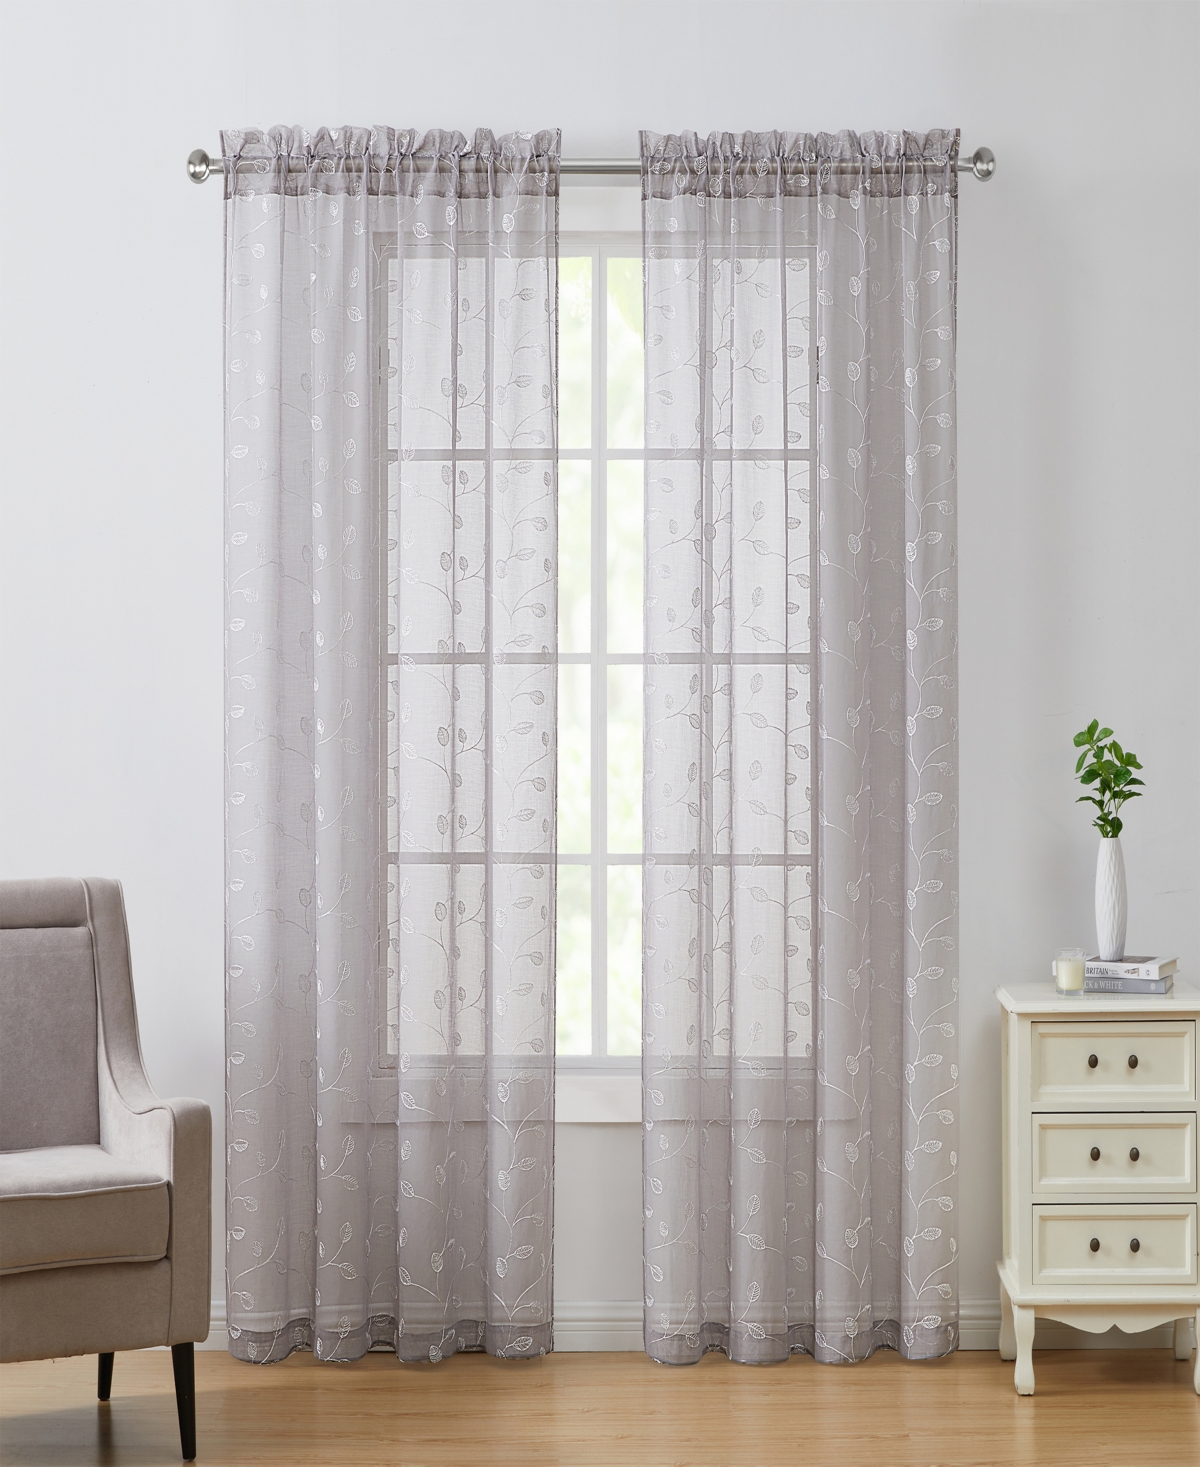 Vcny Home Eva Leaf Metallic Embroidered Sheer 2-piece Curtain Panel Set, 108" X 96" In Gray White